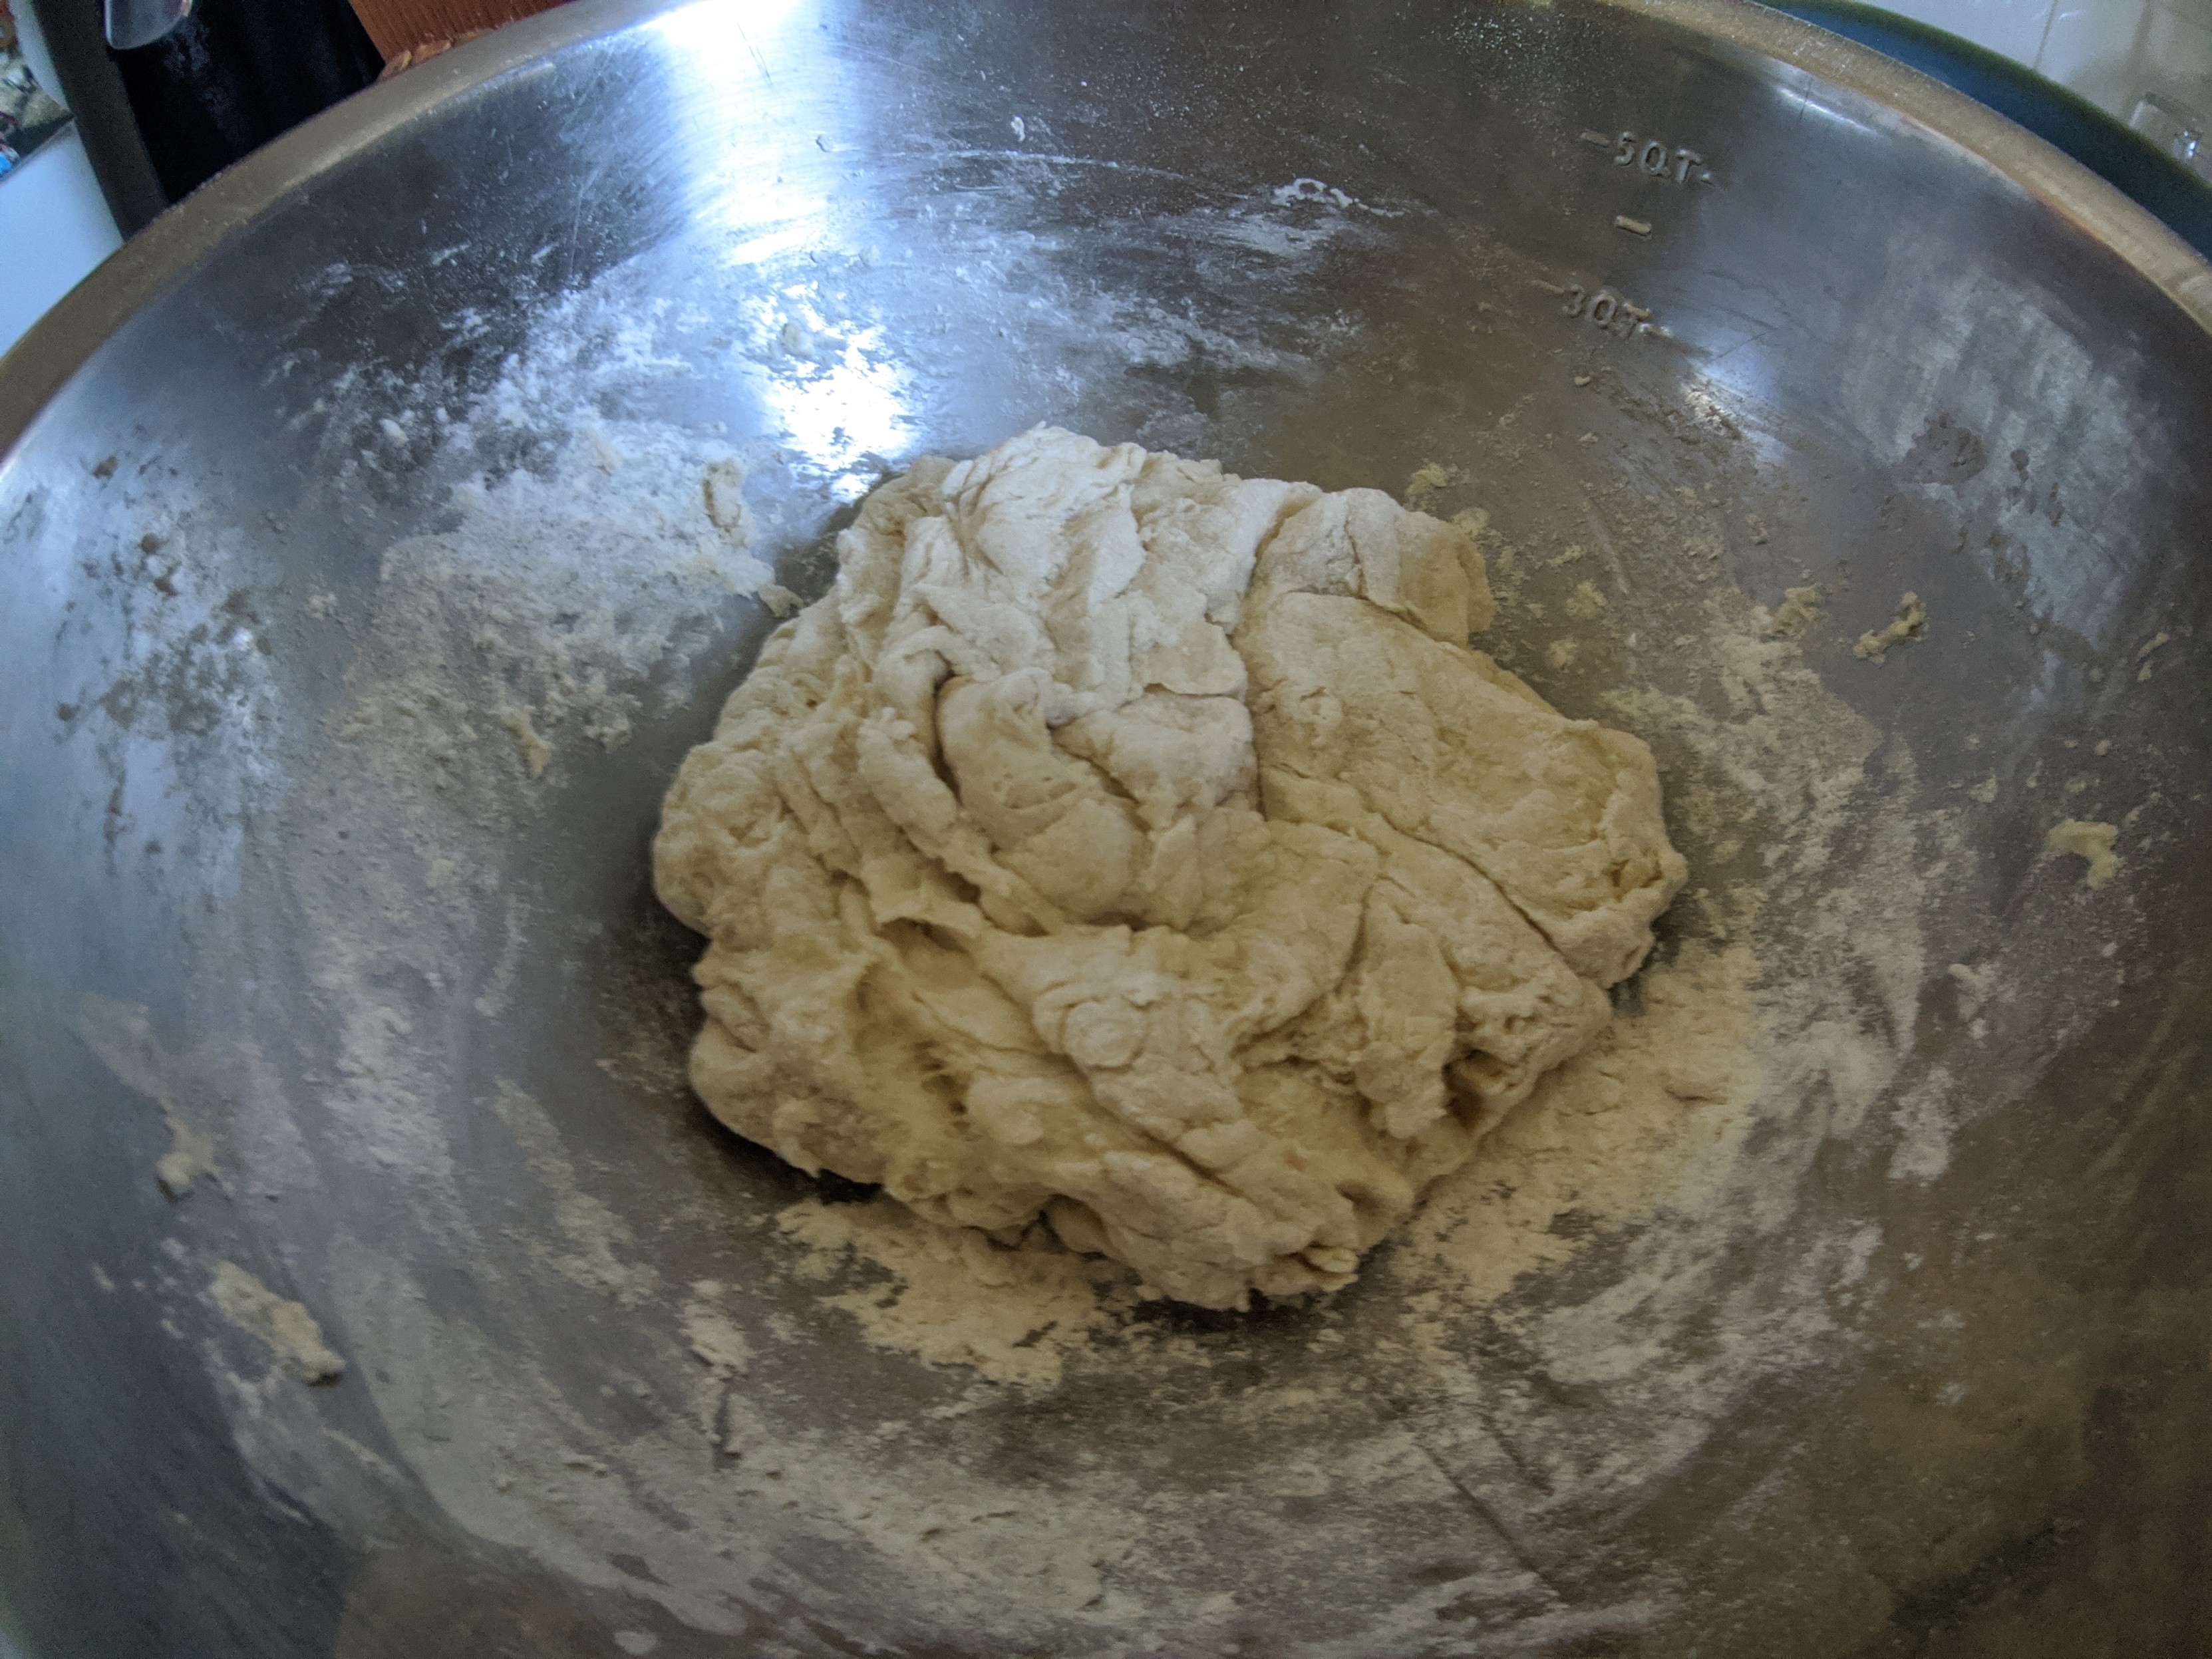 Mixing bowl full of dough that is no longer sticky to touch.